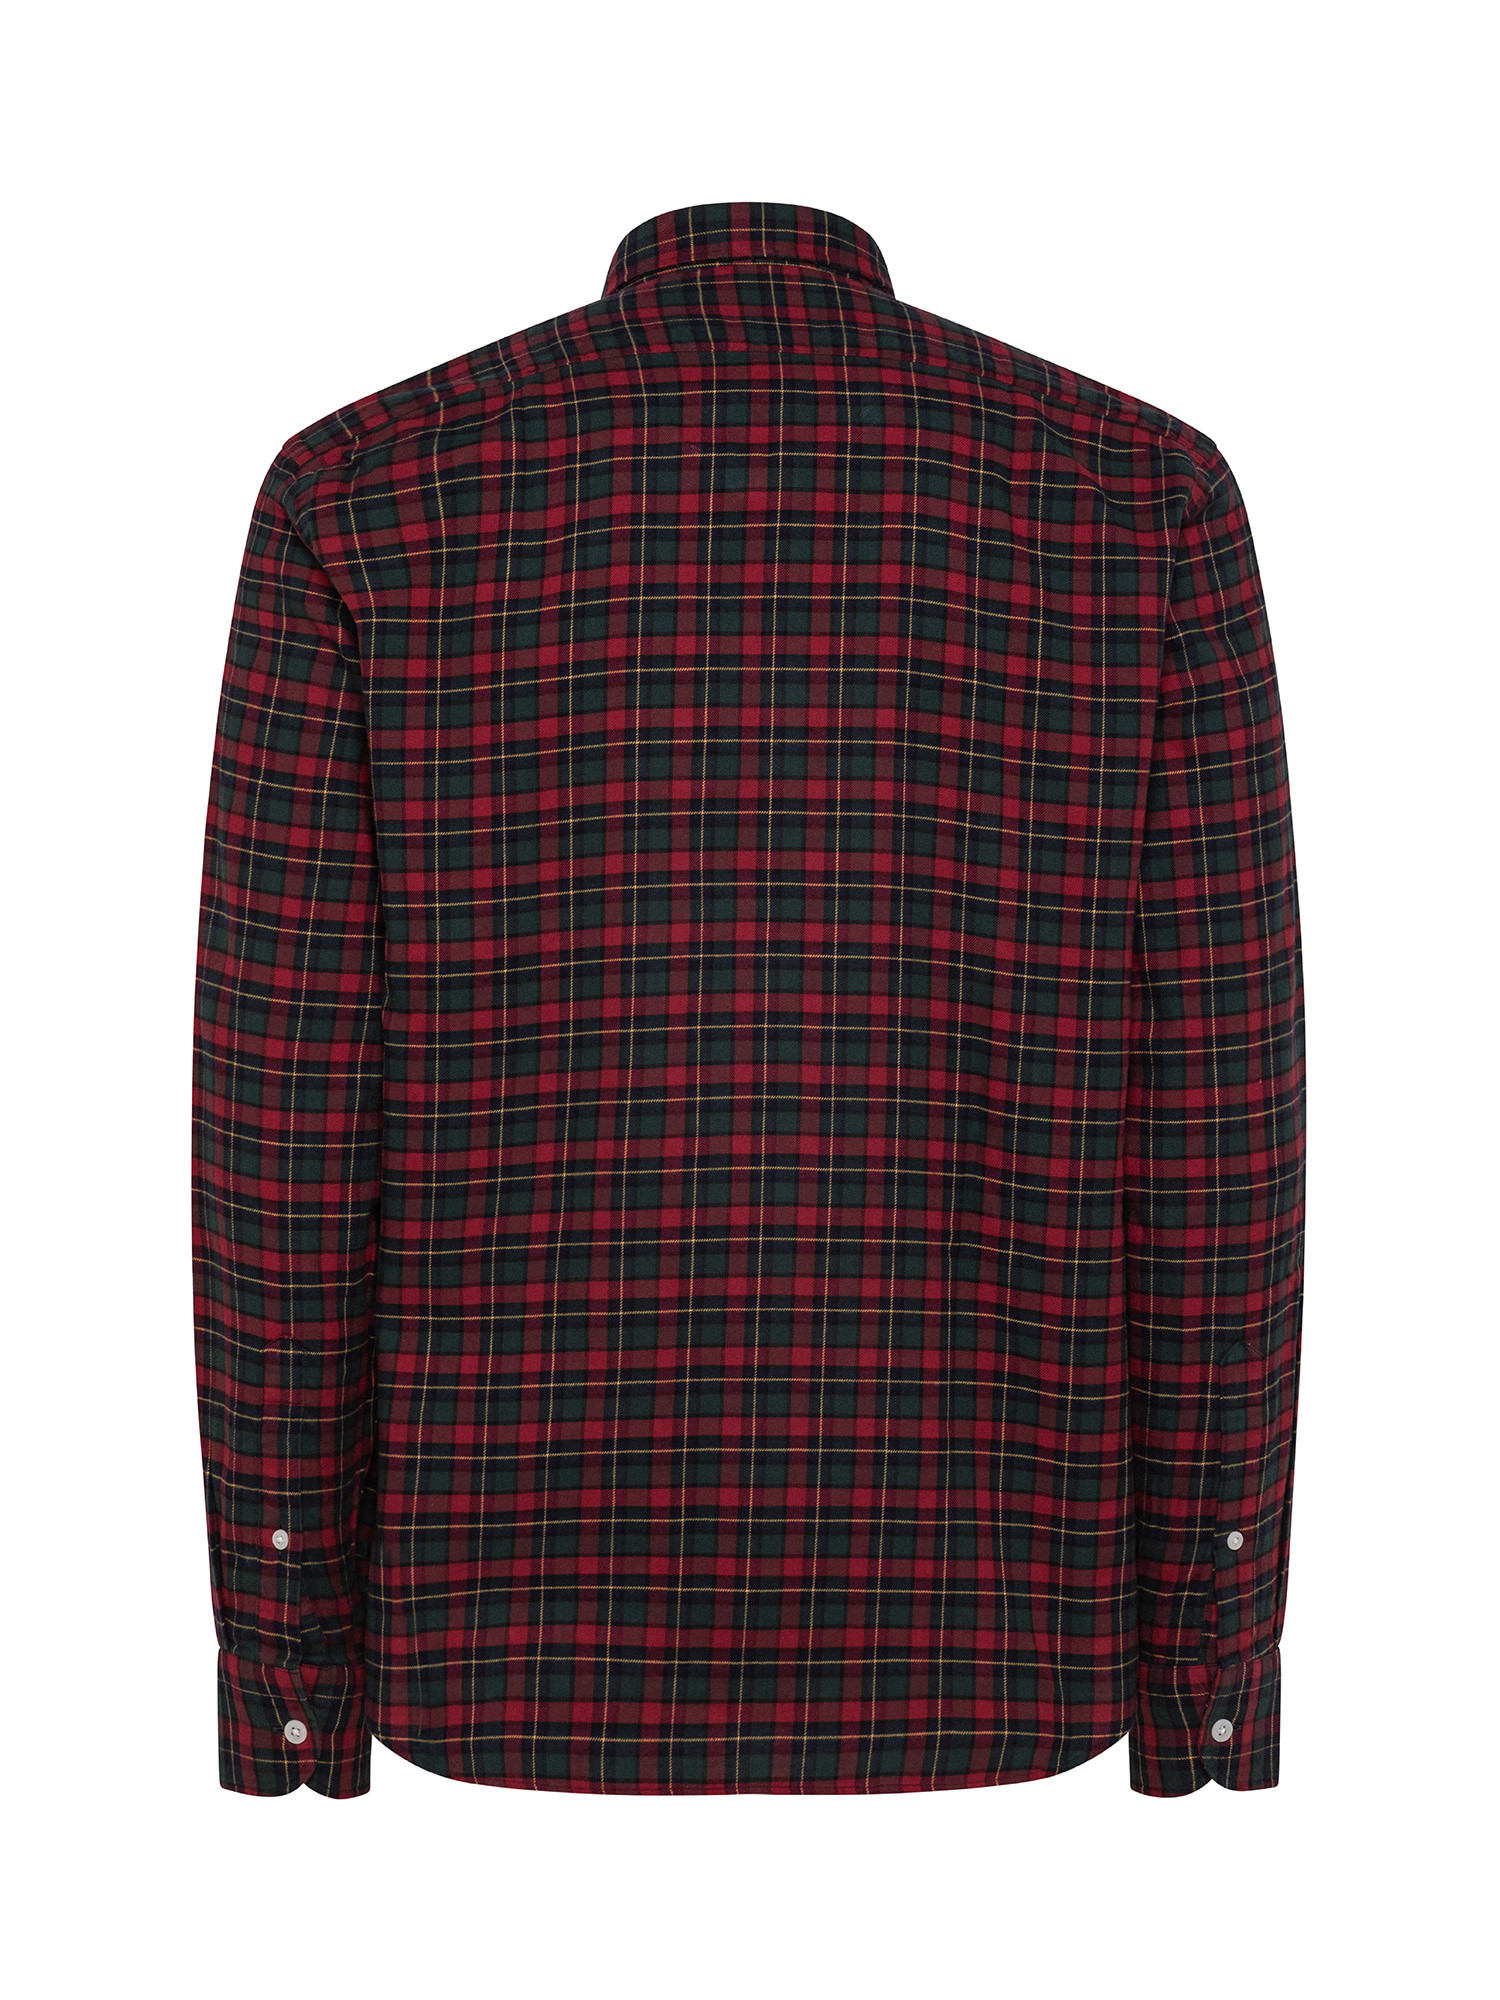 Tailor fit shirt in soft organic cotton flannel, Red, large image number 1